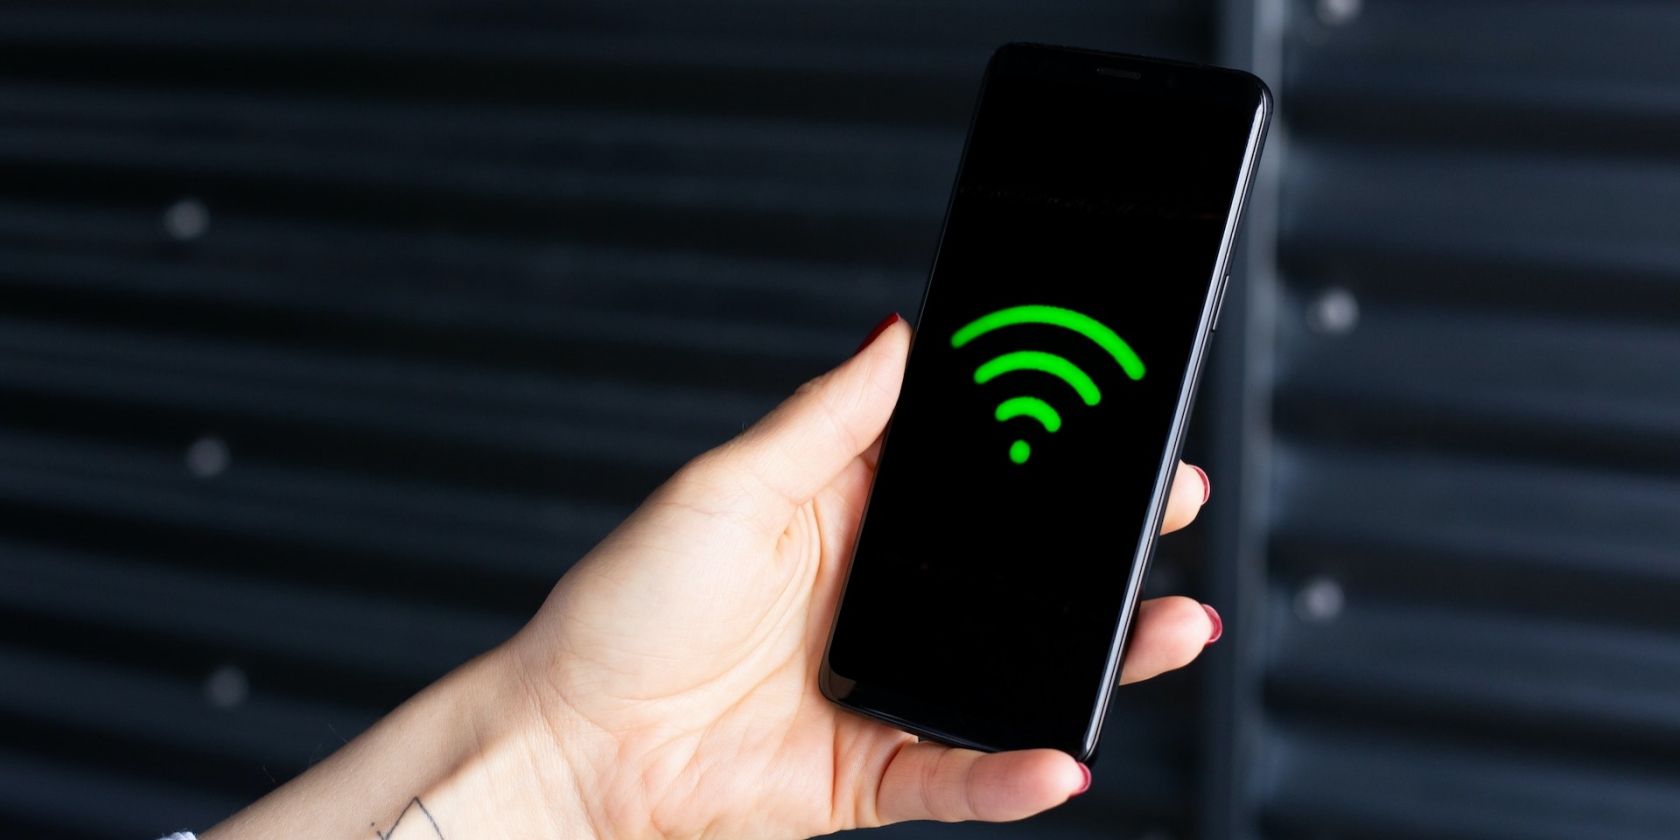 Wi-Fi symbol on a smartphone in hand